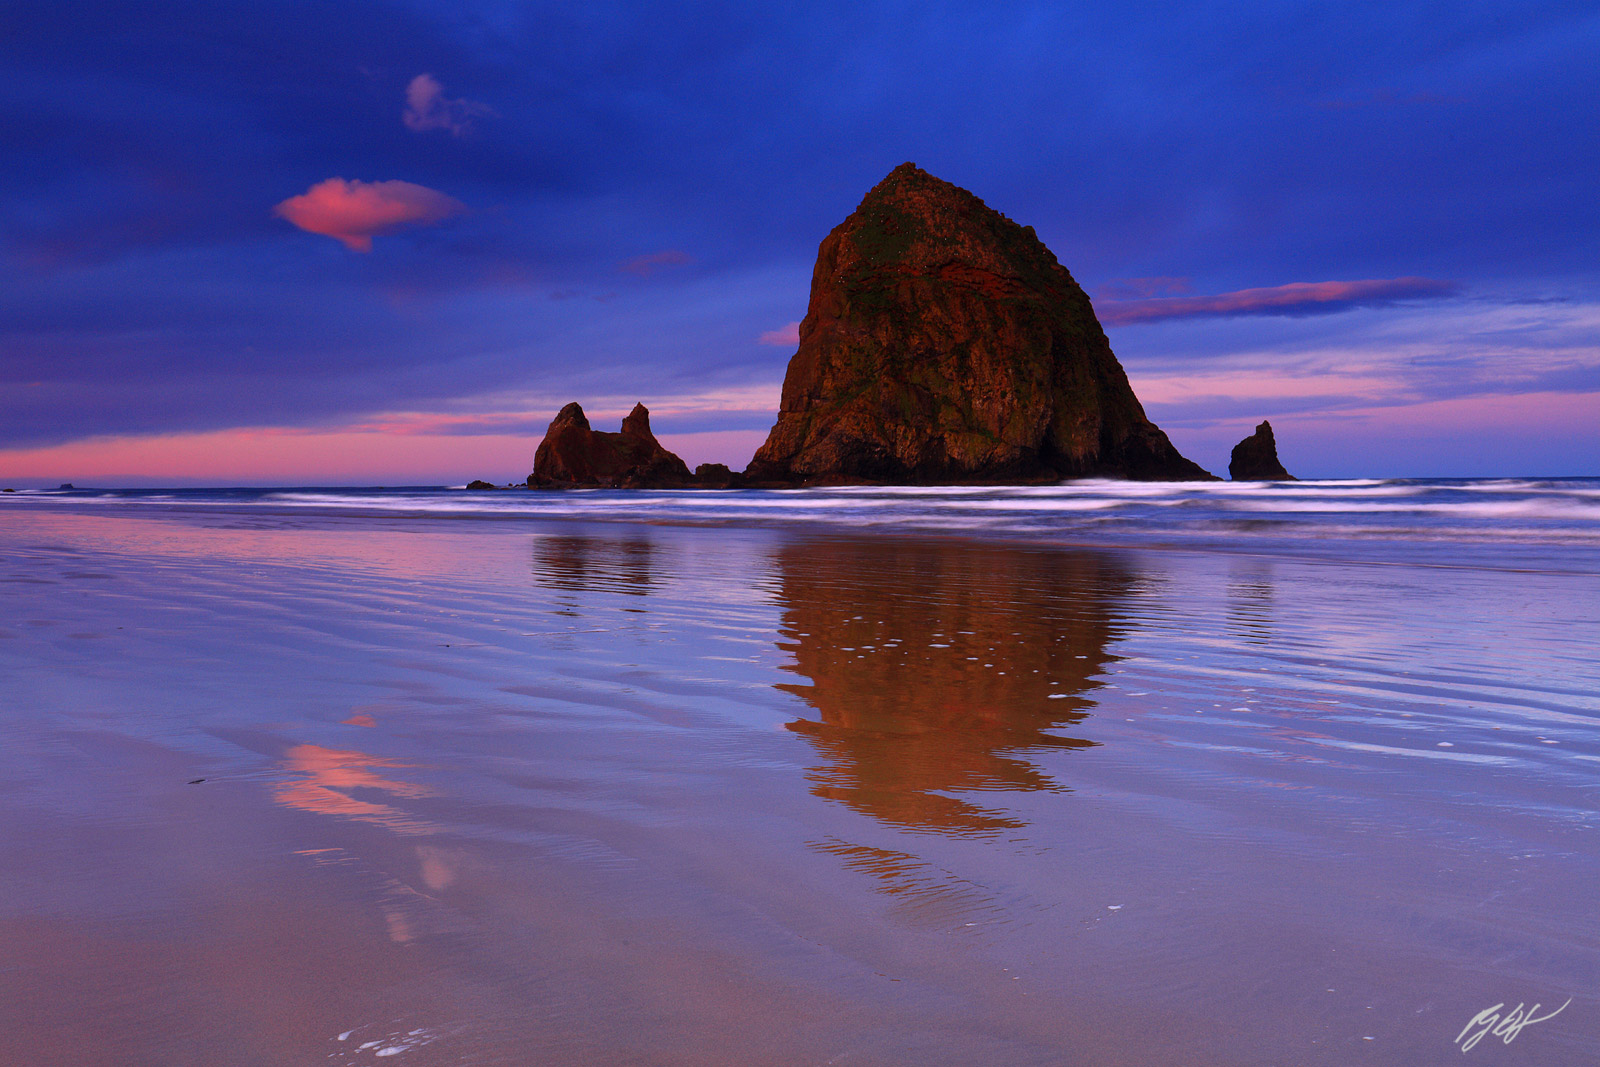 Sunrise and Haystack Rock from Cannon Beach on the Oregon Coast